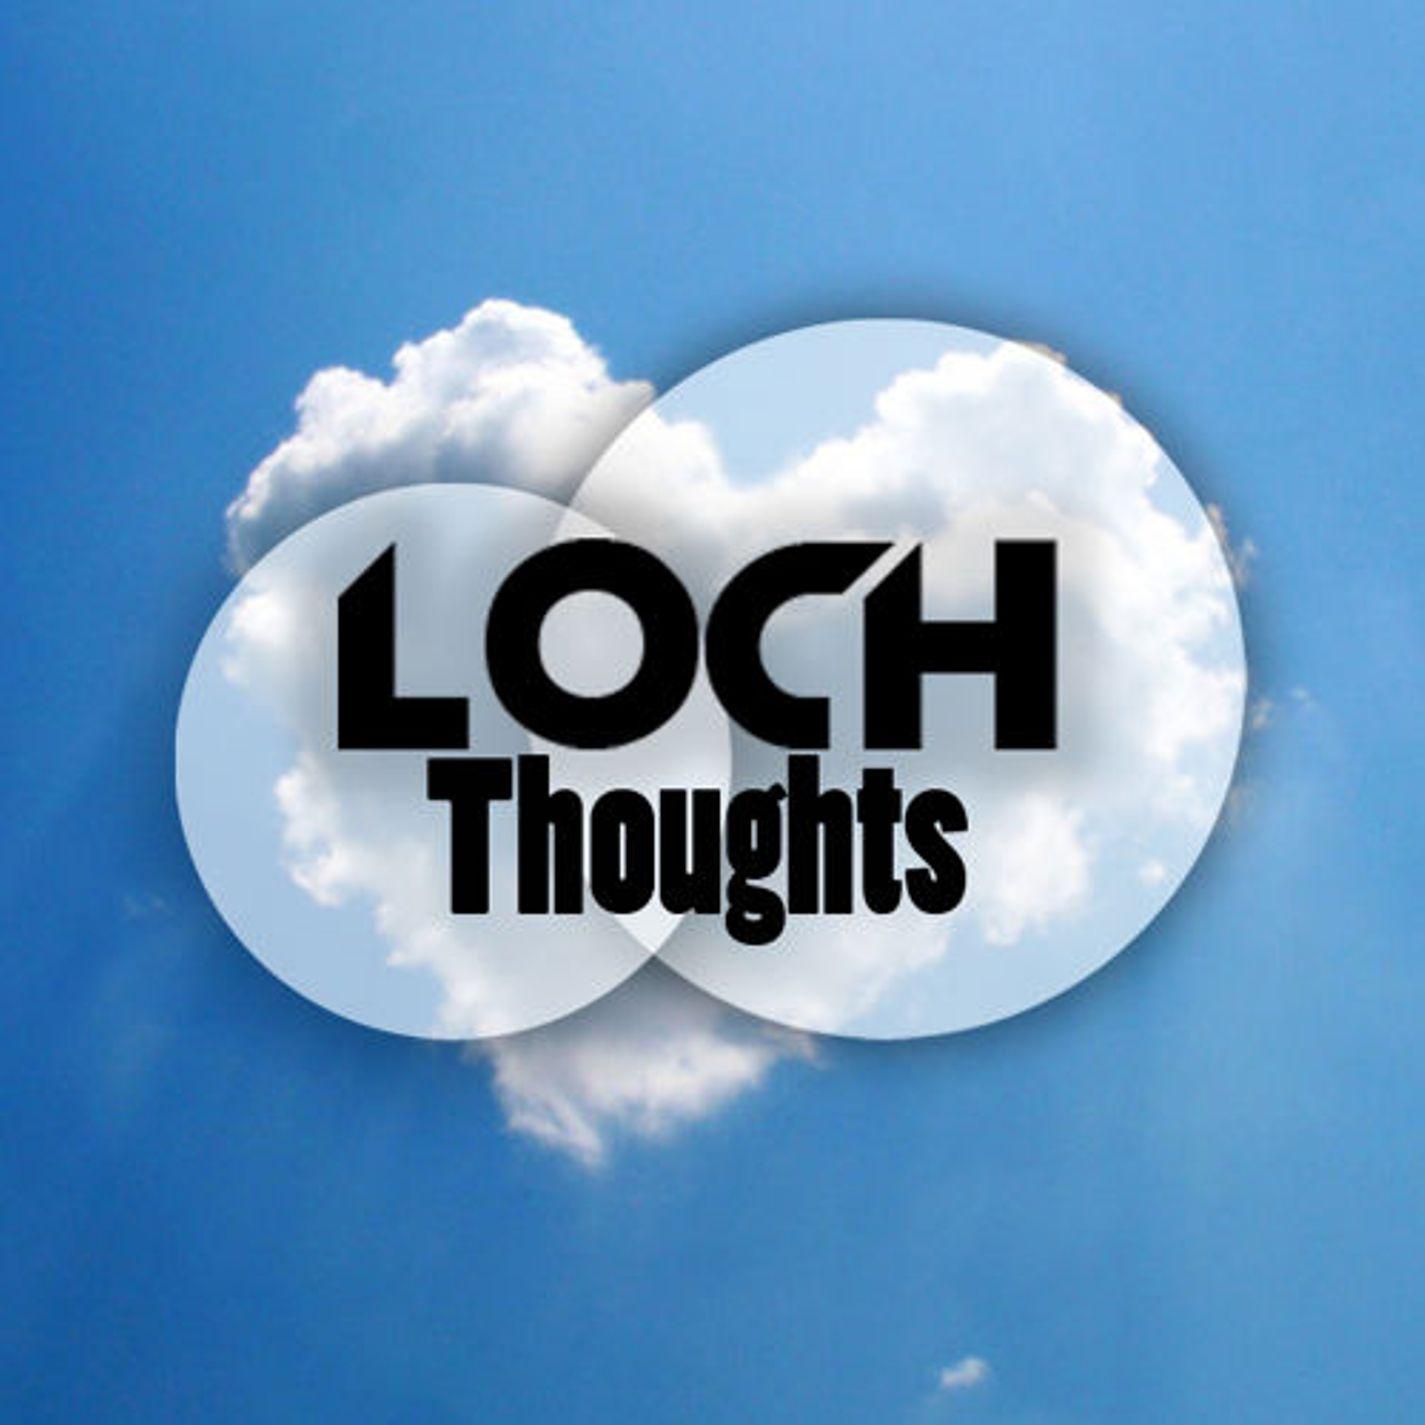 LOCH - Thoughts